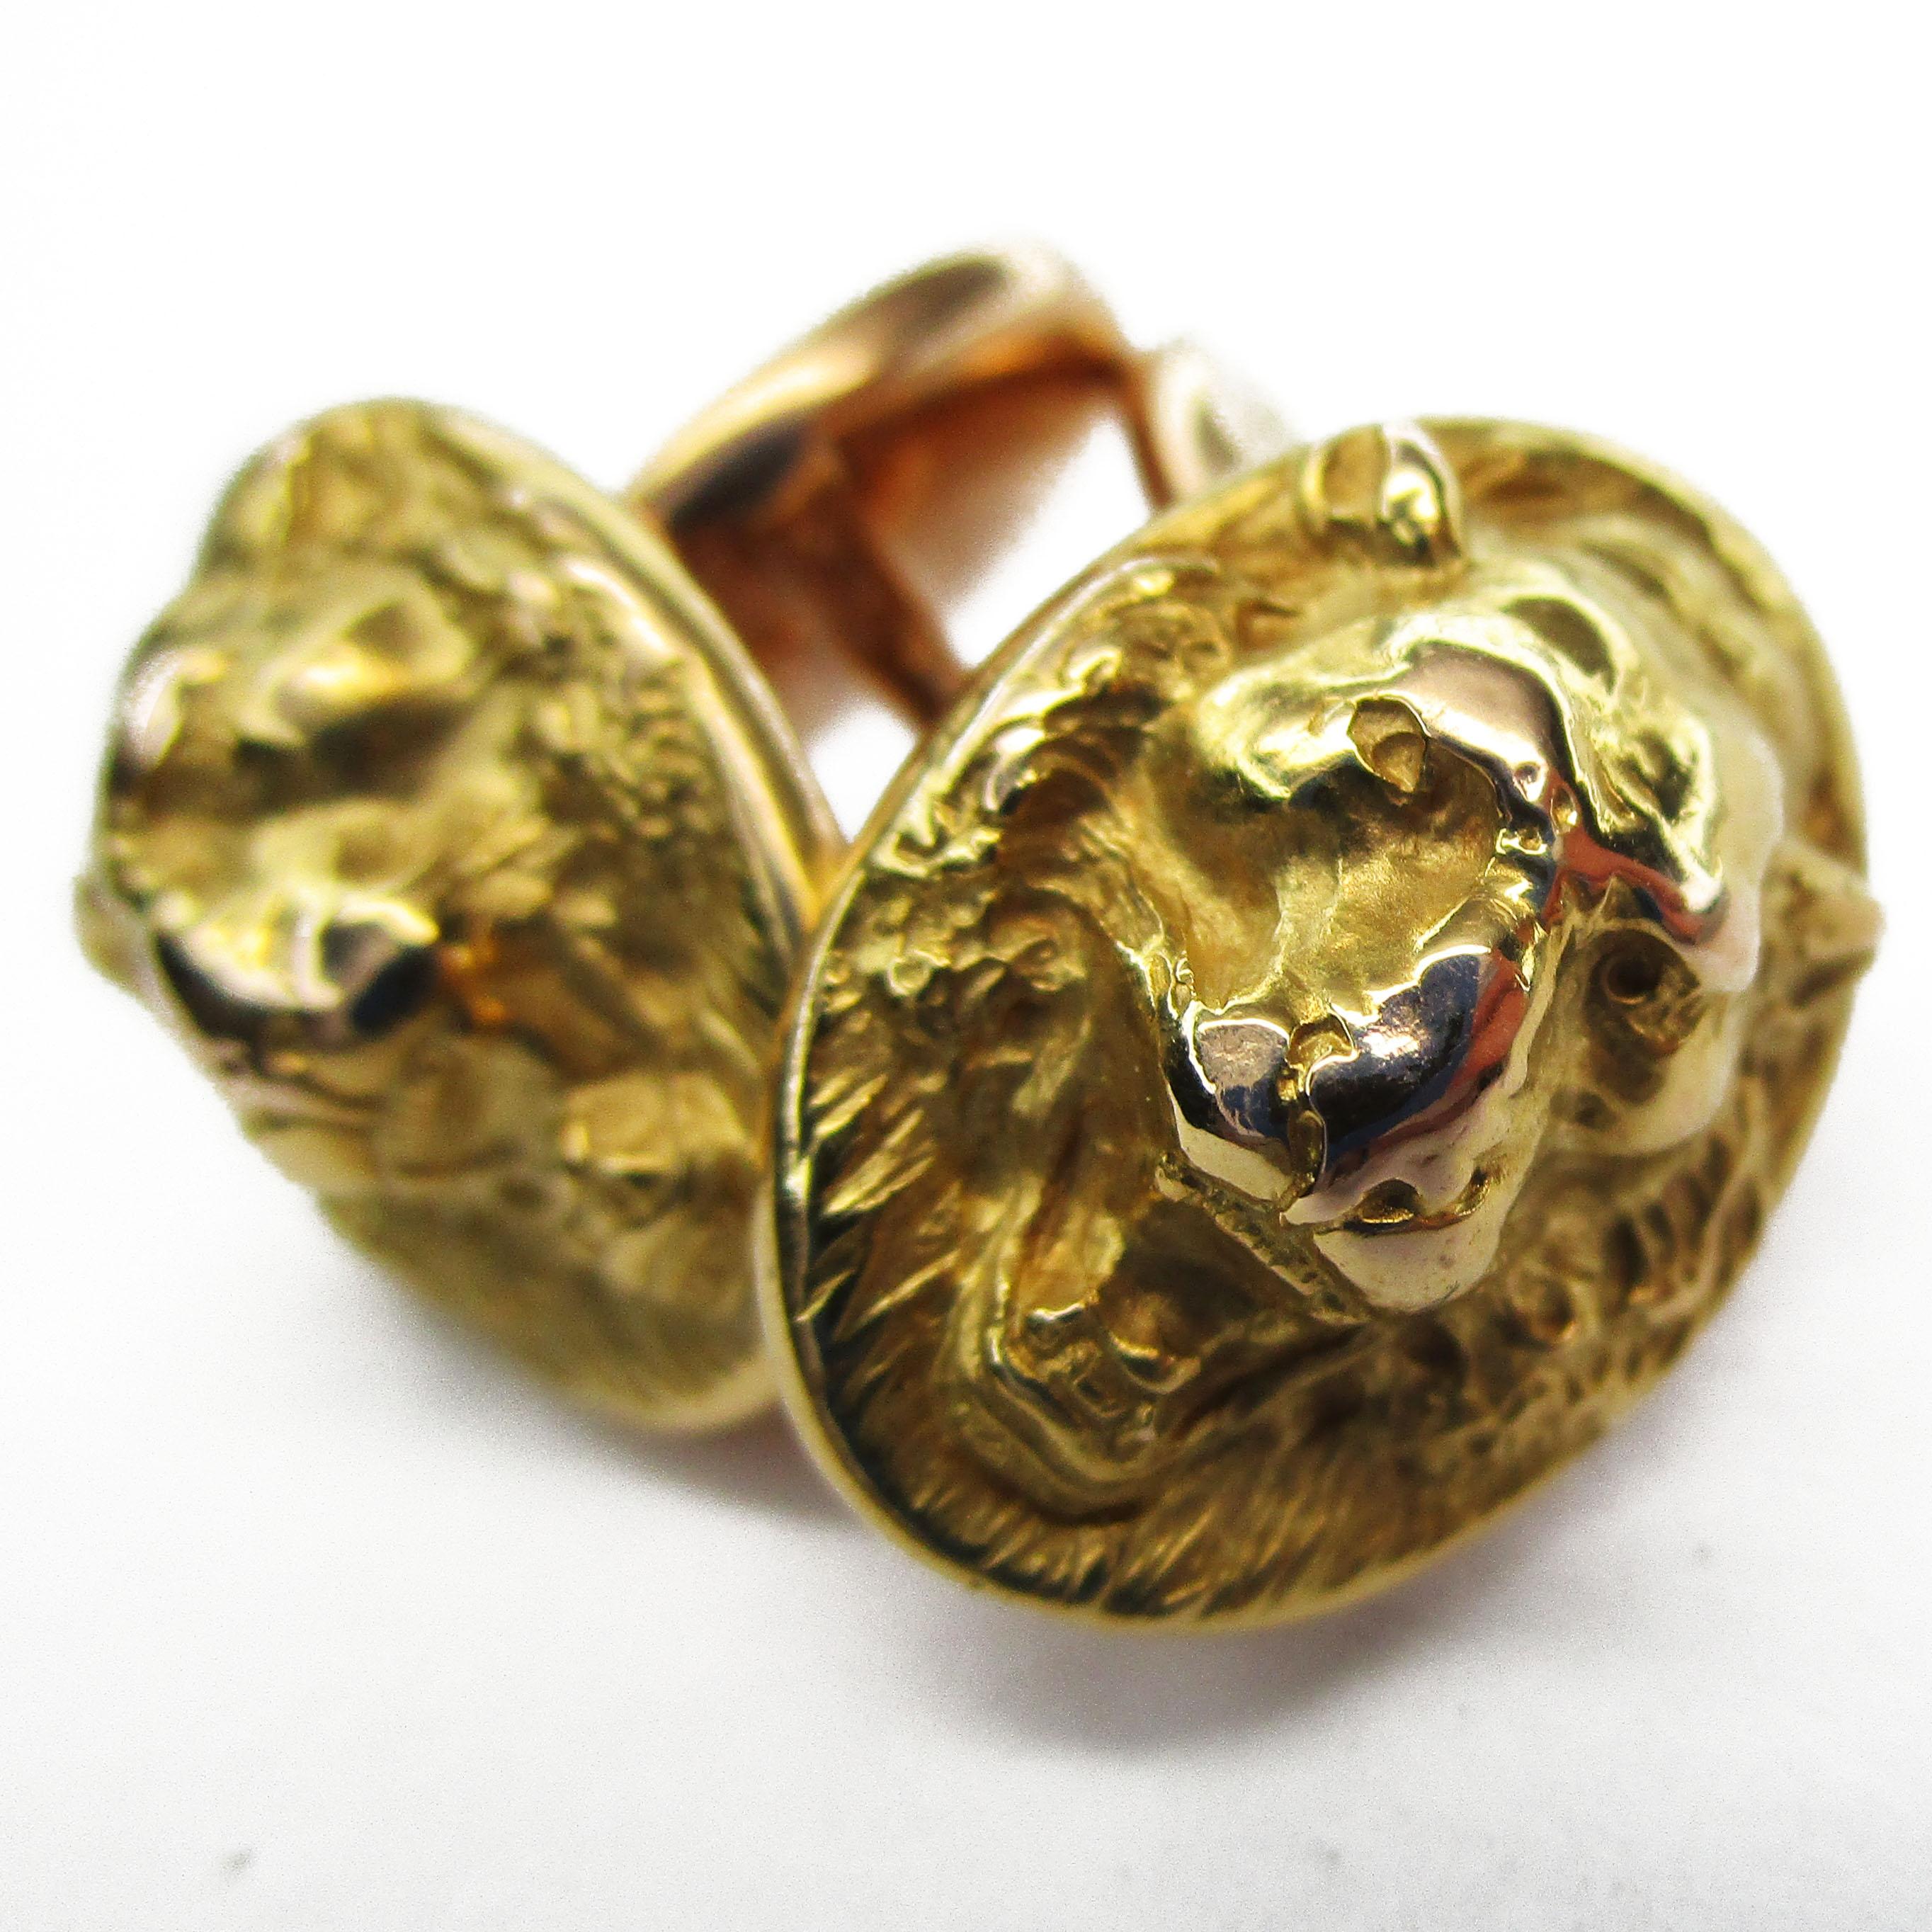 1890 Victorian 14K Yellow Gold Lion Face Krementz Cufflinks In Excellent Condition For Sale In Lexington, KY